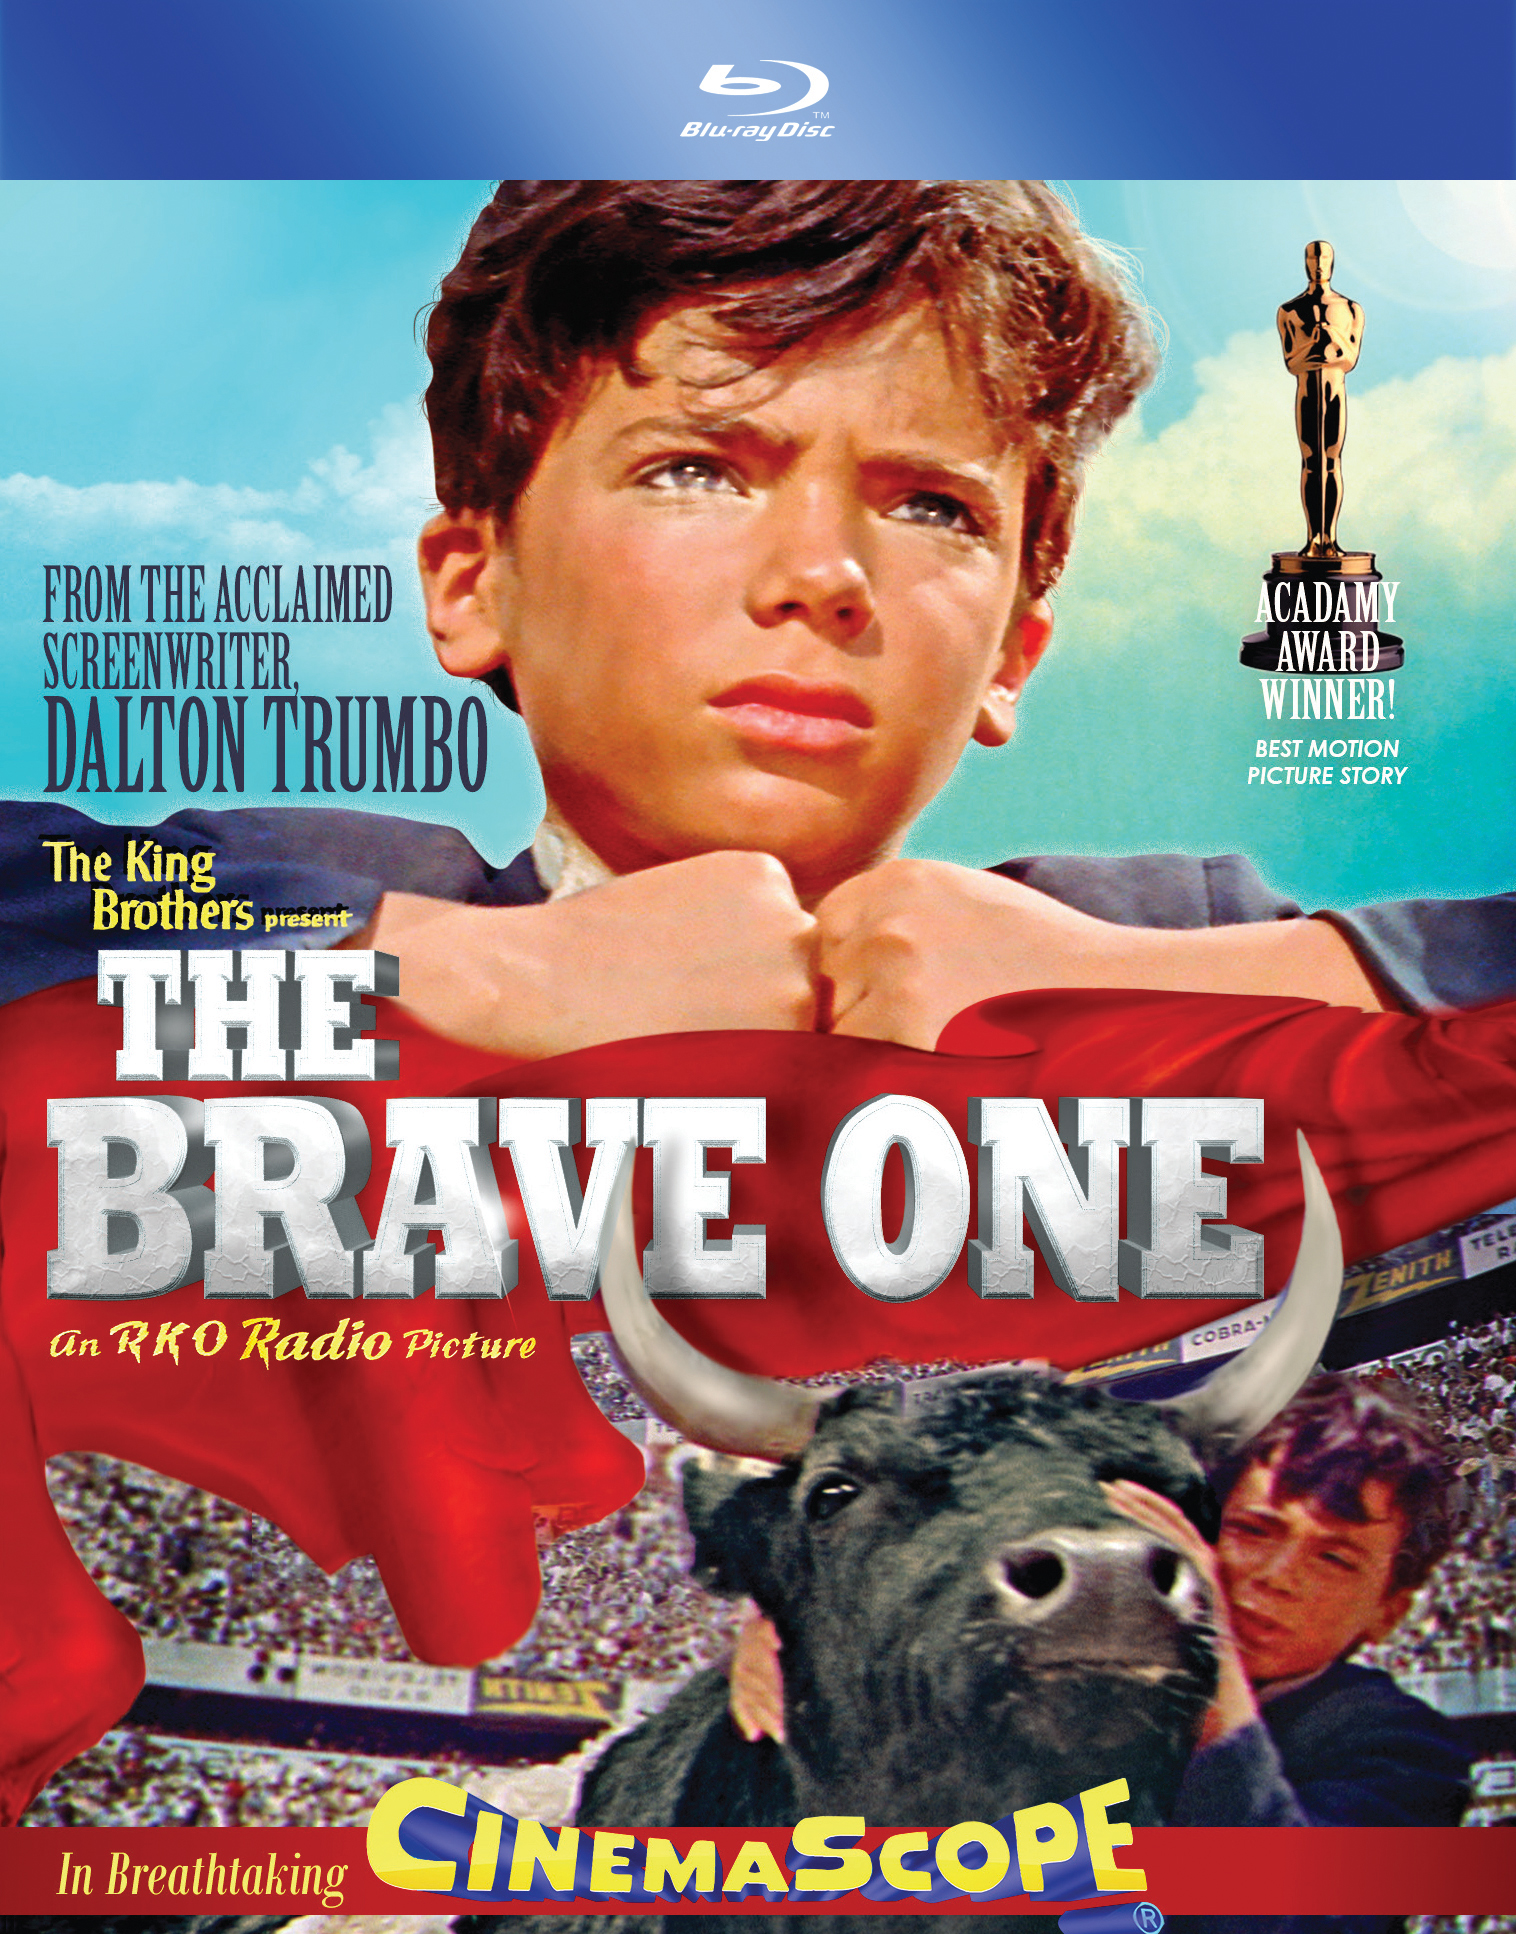 The Brave One [Blu-ray] [1956] - Best Buy